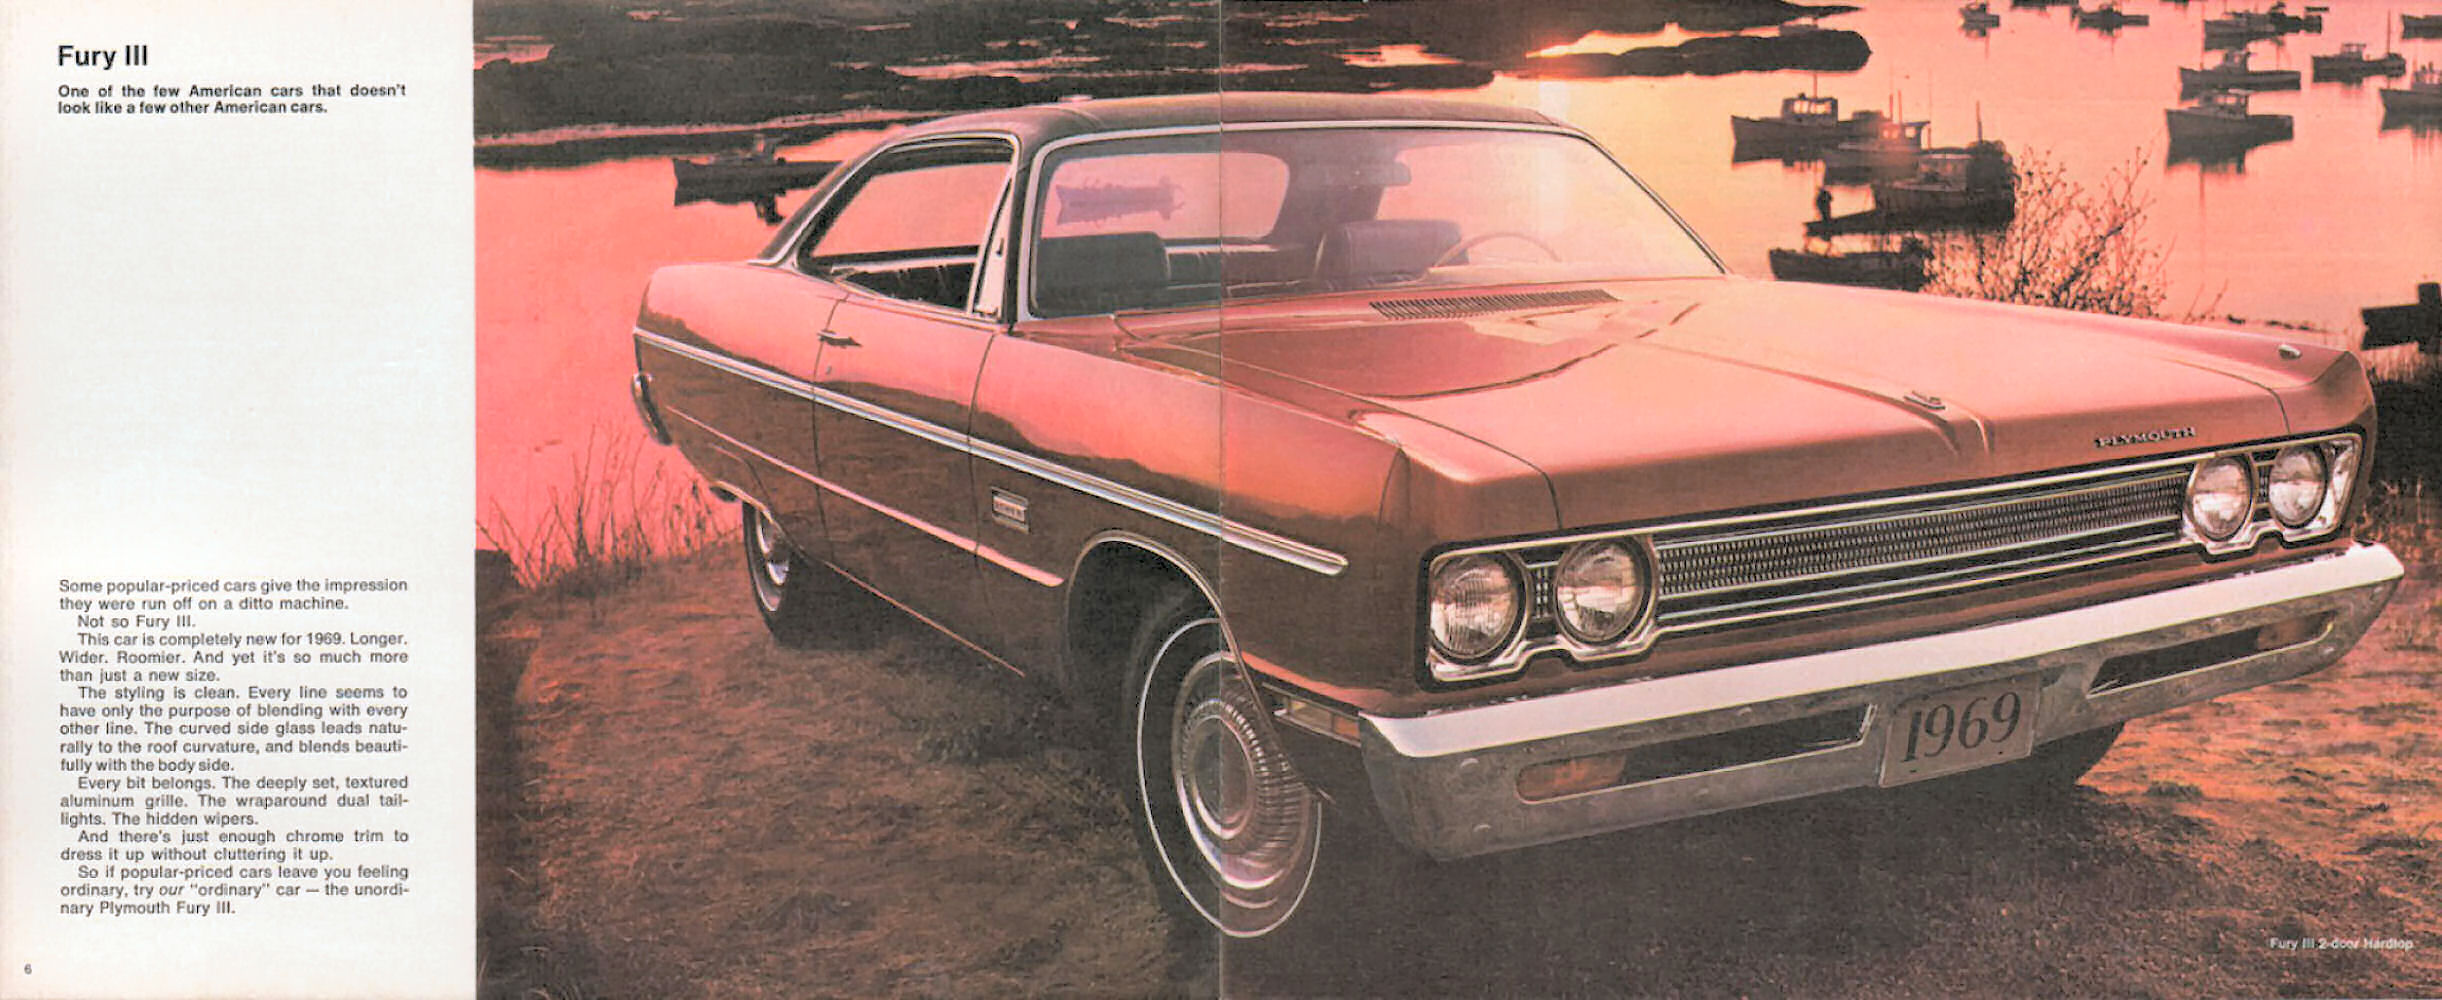 1969_Plymouth_Full_Line-06-07